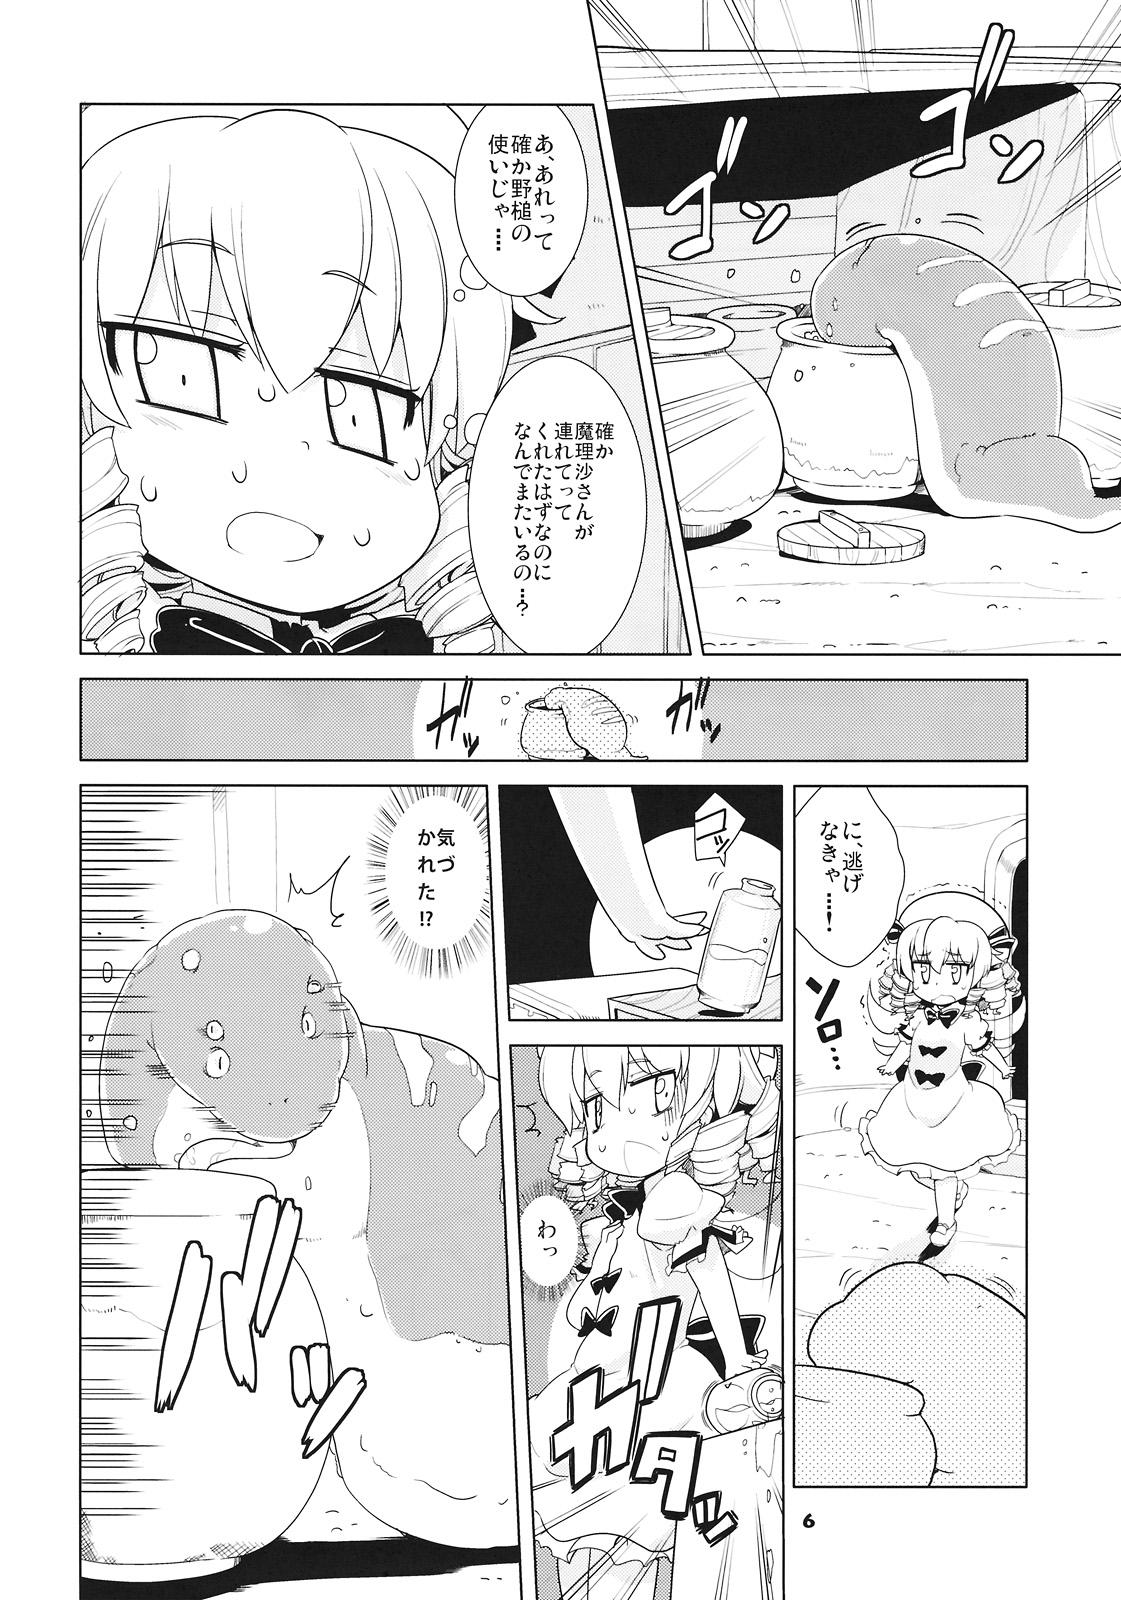 Pija MISSING MOON - Touhou project Topless - Page 6